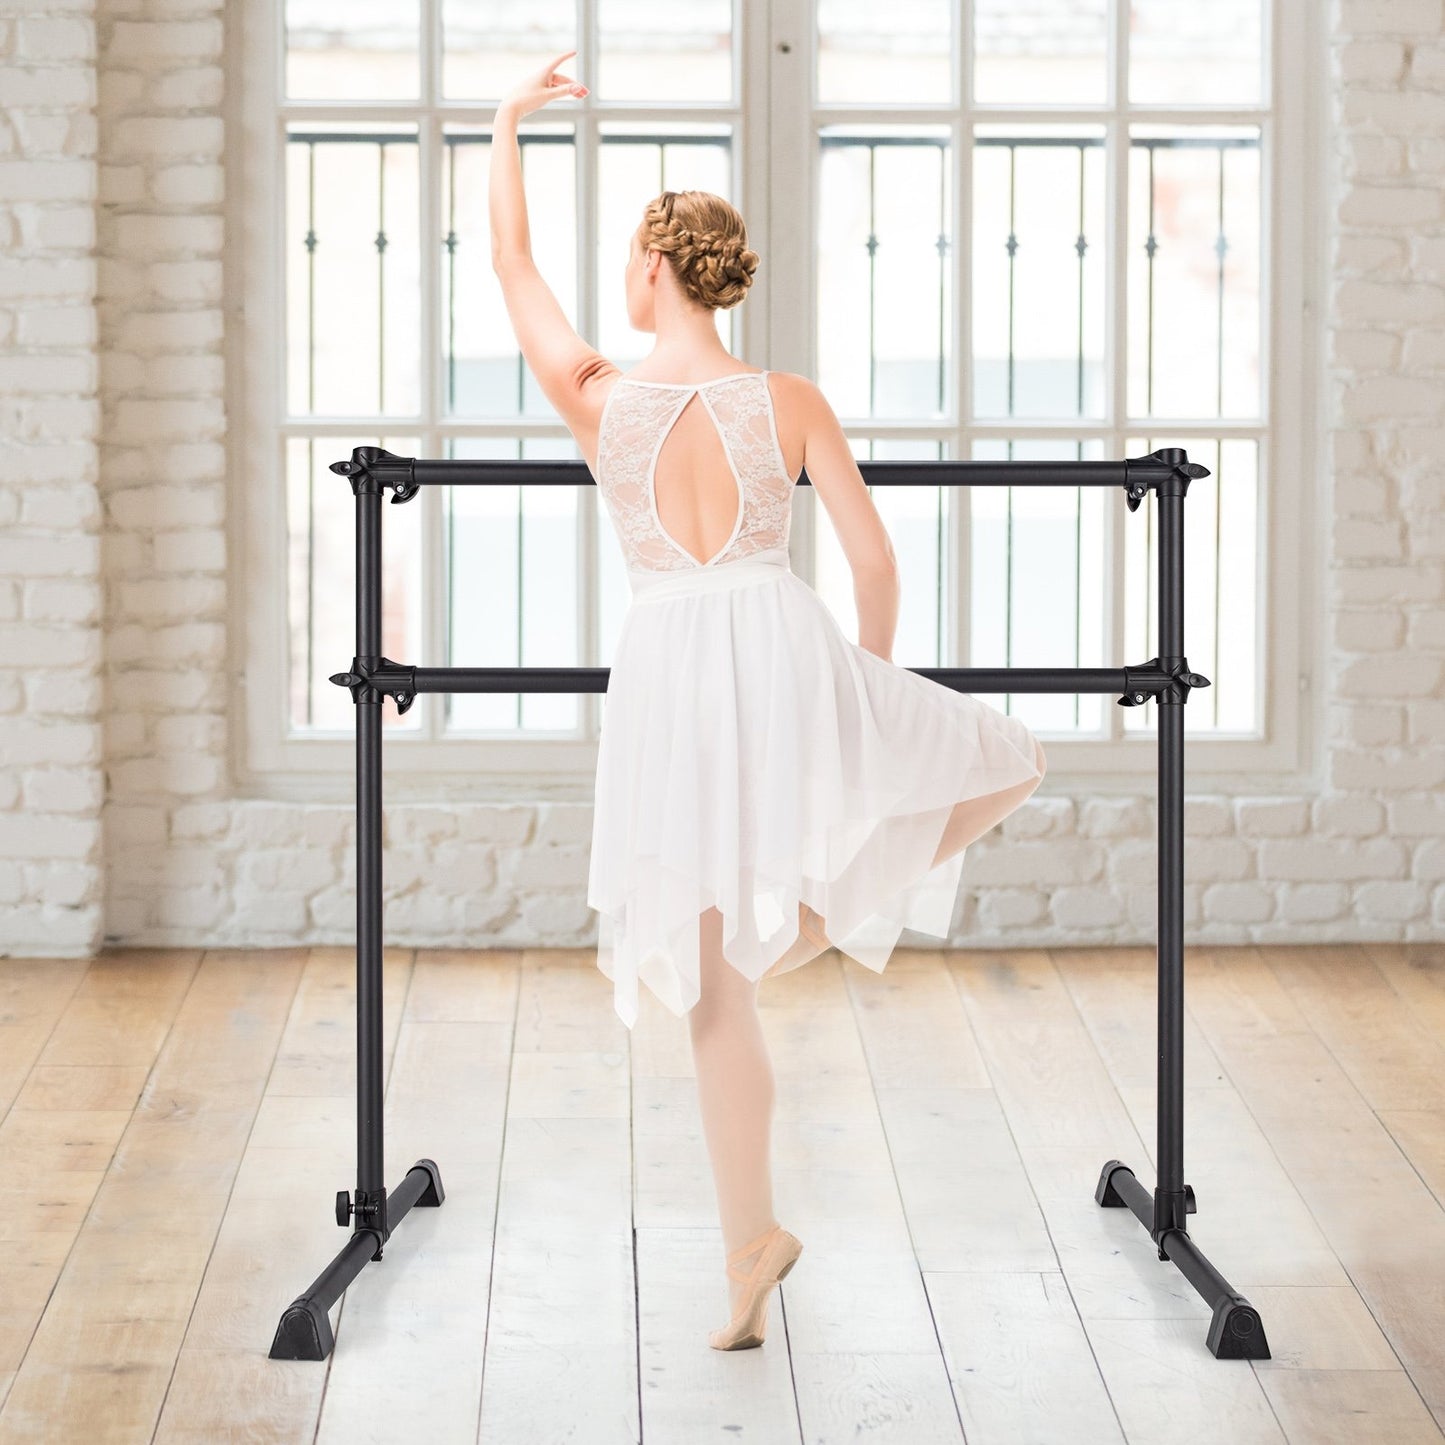 4 Feet Portable Double Freestanding Barre Dancing Stretching, Black at Gallery Canada